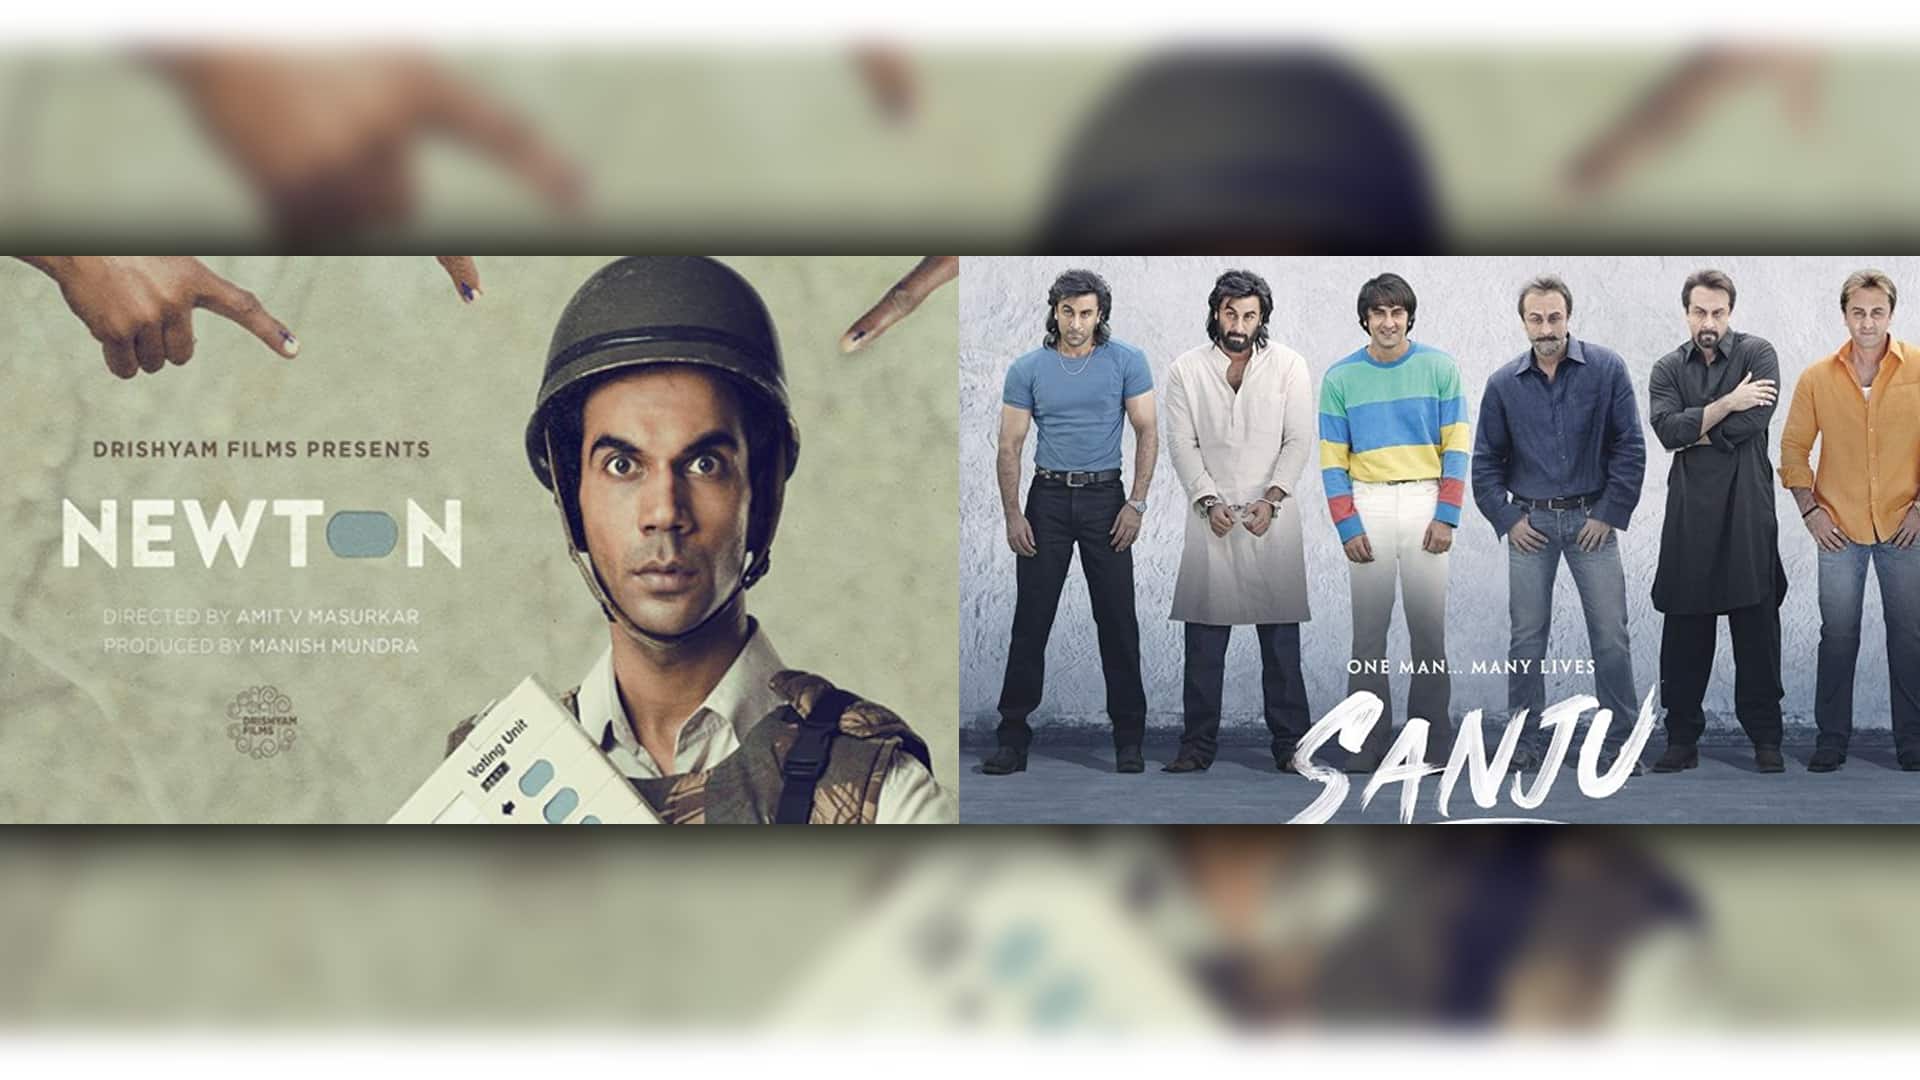 For AACTA Asia filmfare awards these 3 indian films are nominated